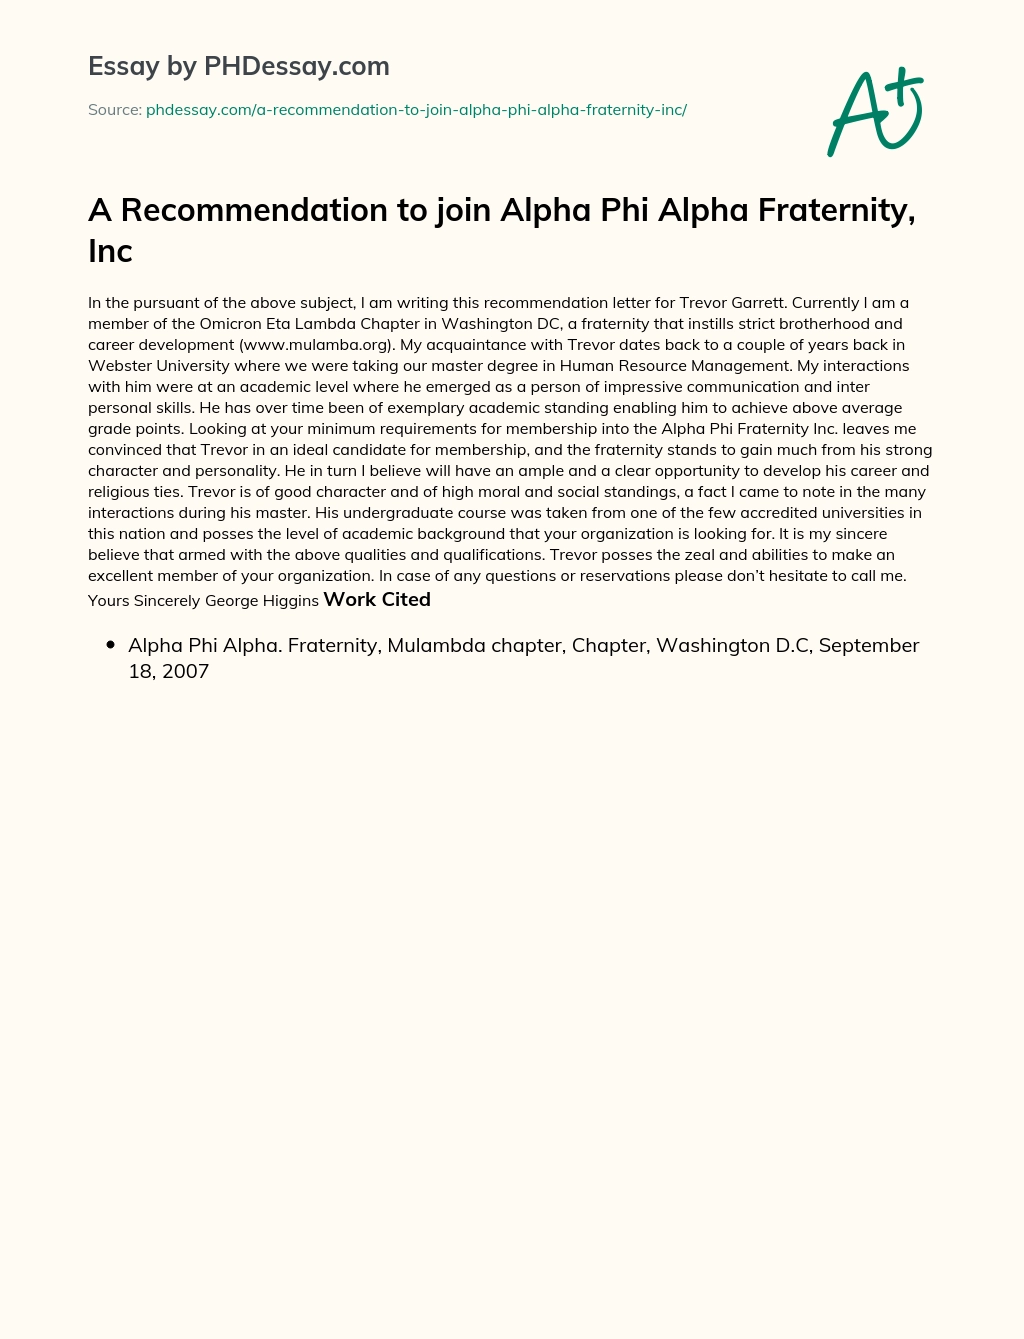 A Recommendation to join Alpha Phi Alpha Fraternity, Inc